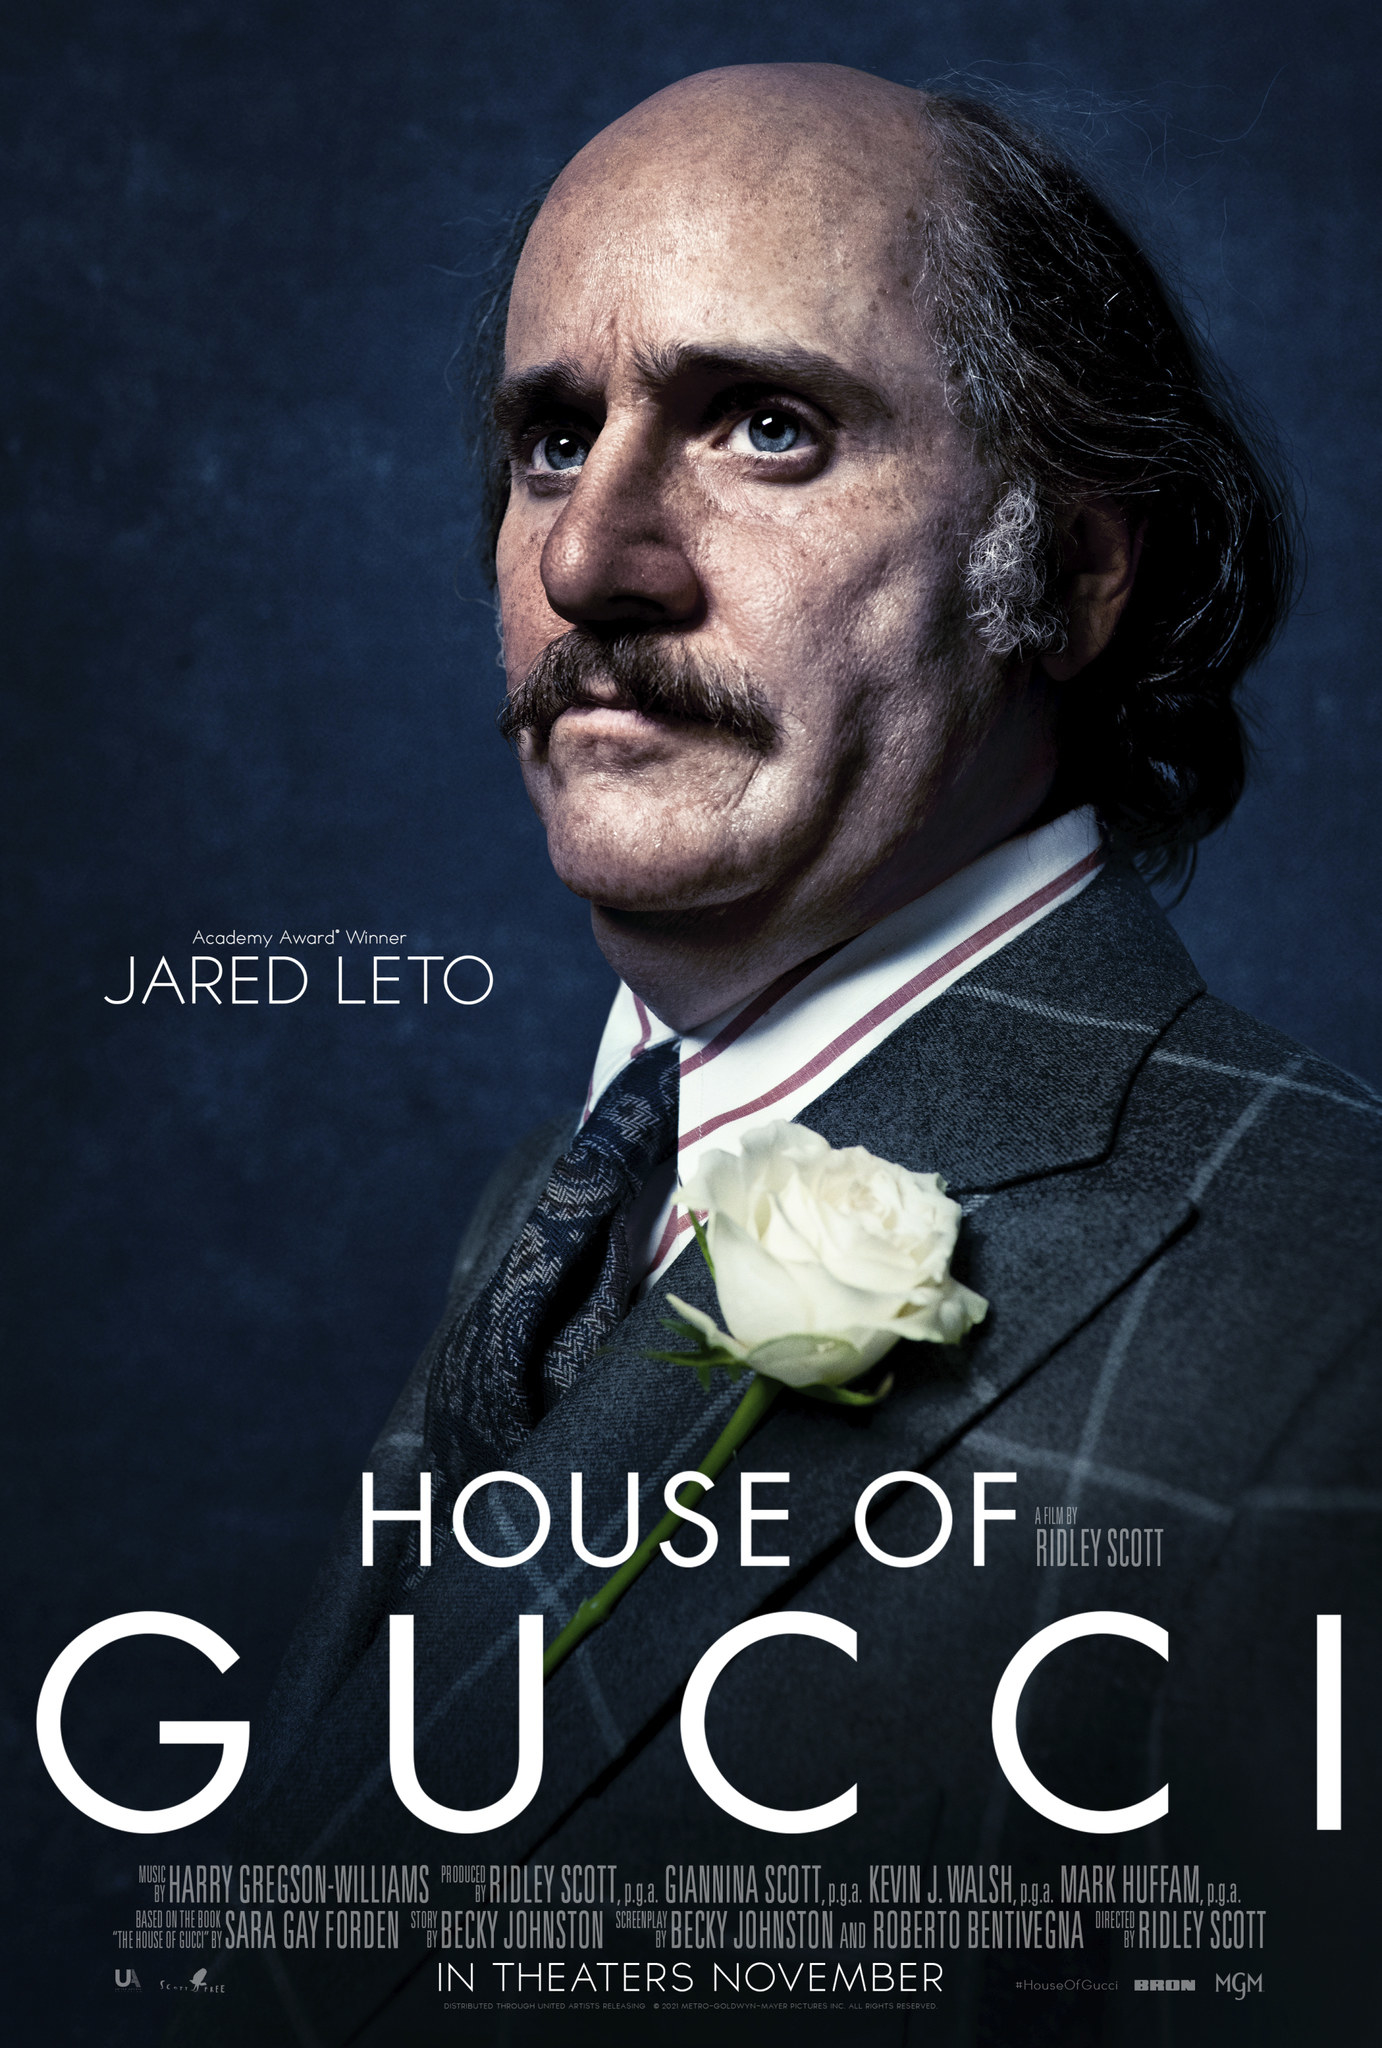 The poster featuring Leto as Paolo Gucci